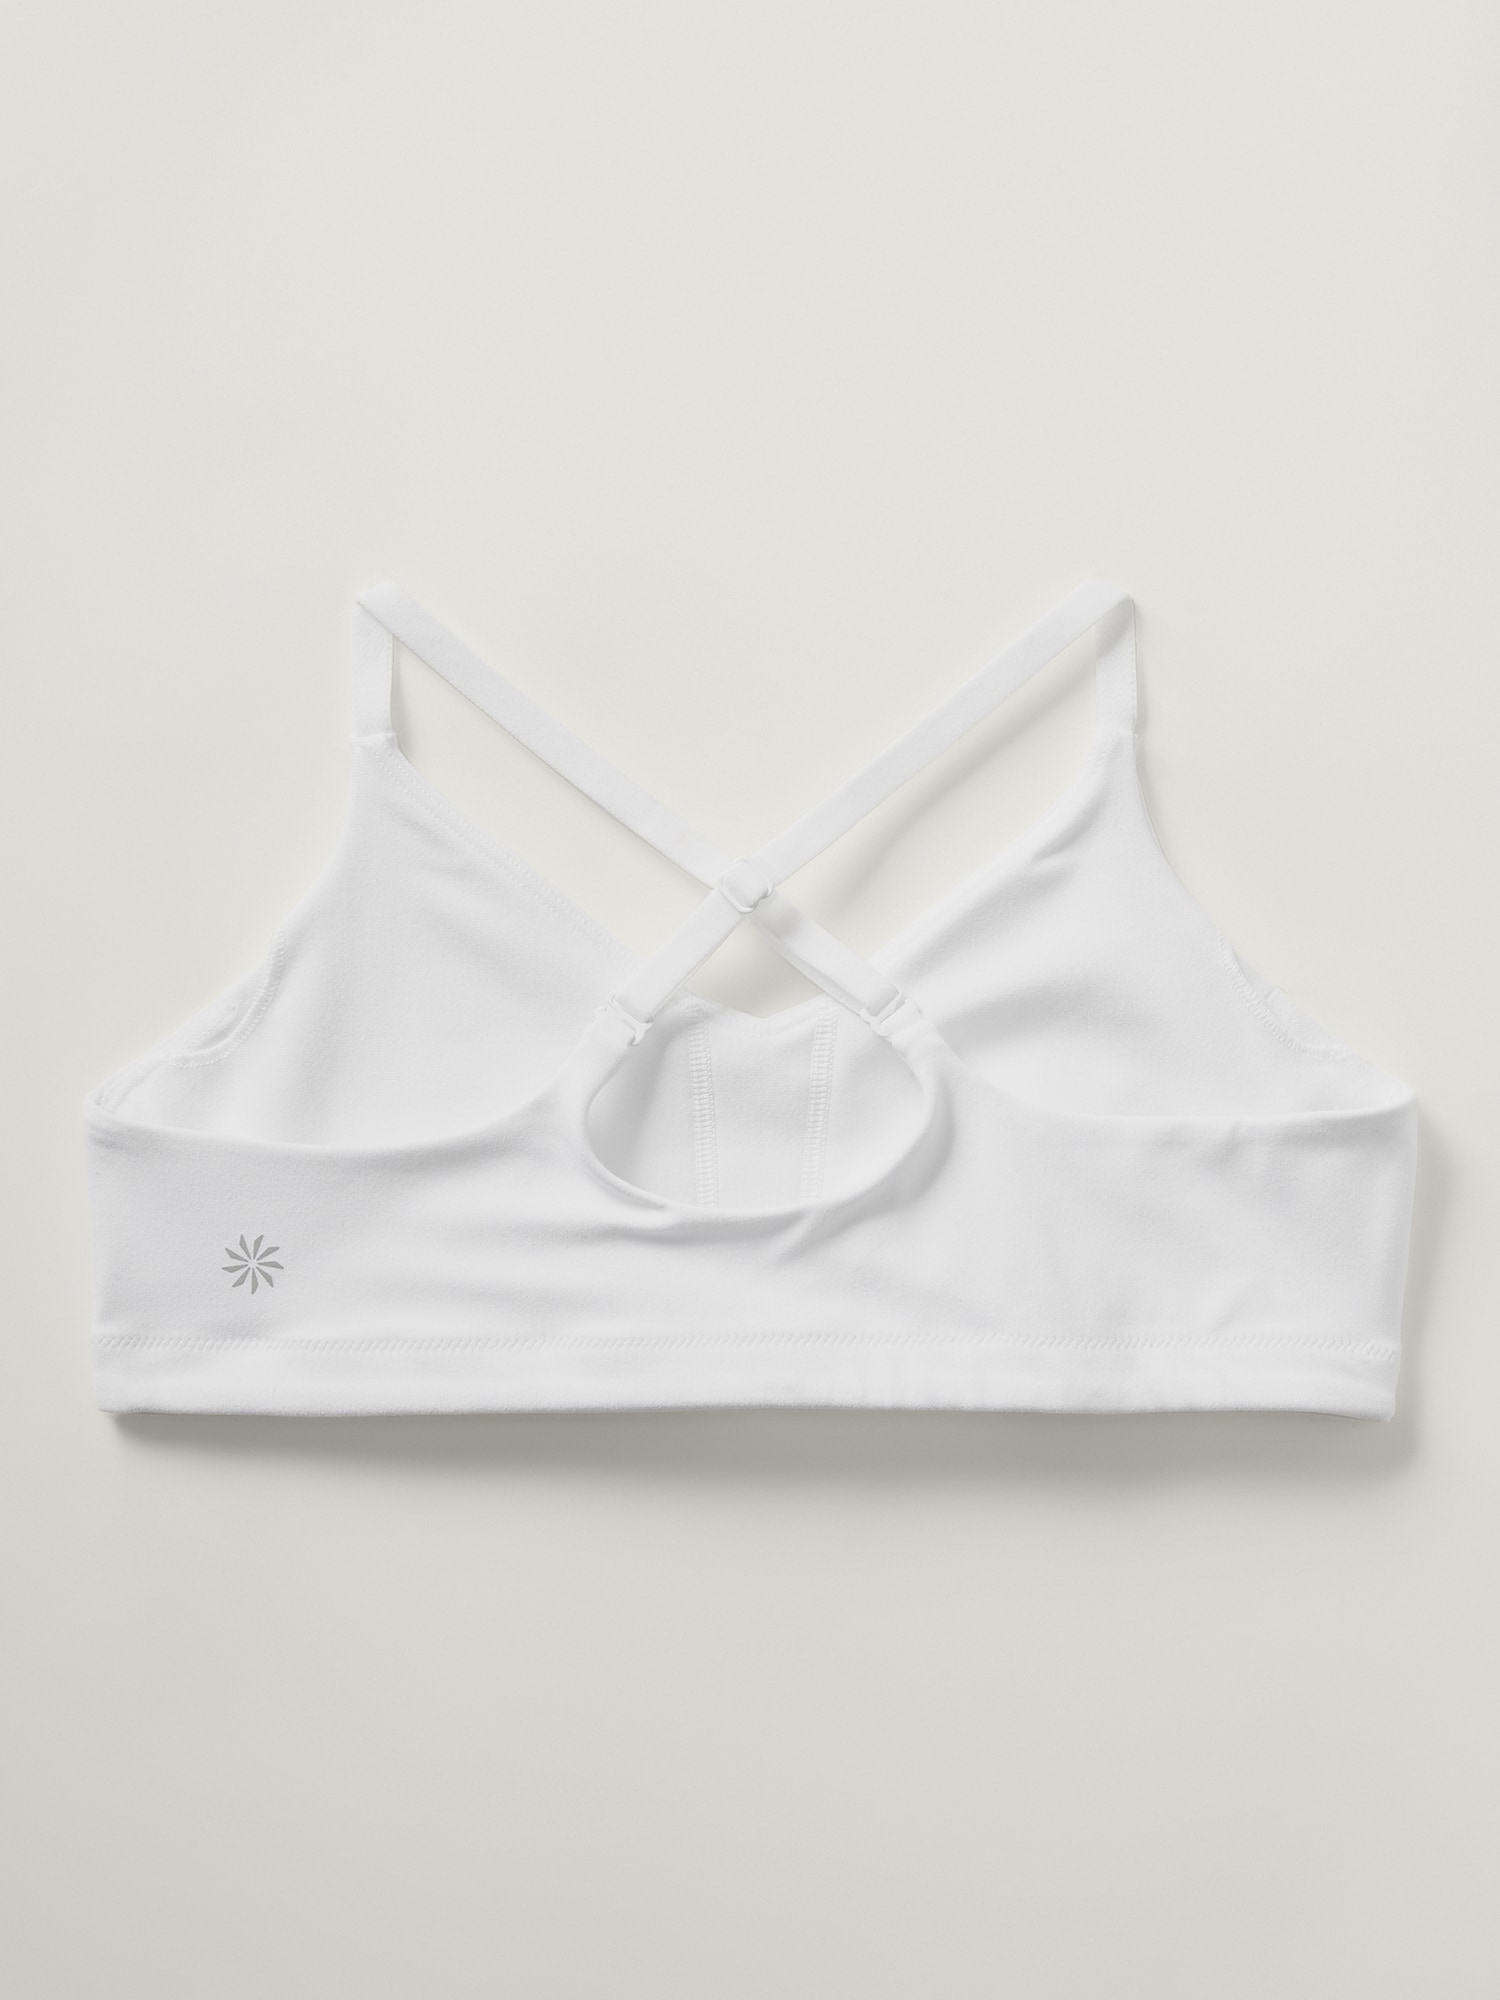 All In Bra by Athleta - Proud Mary